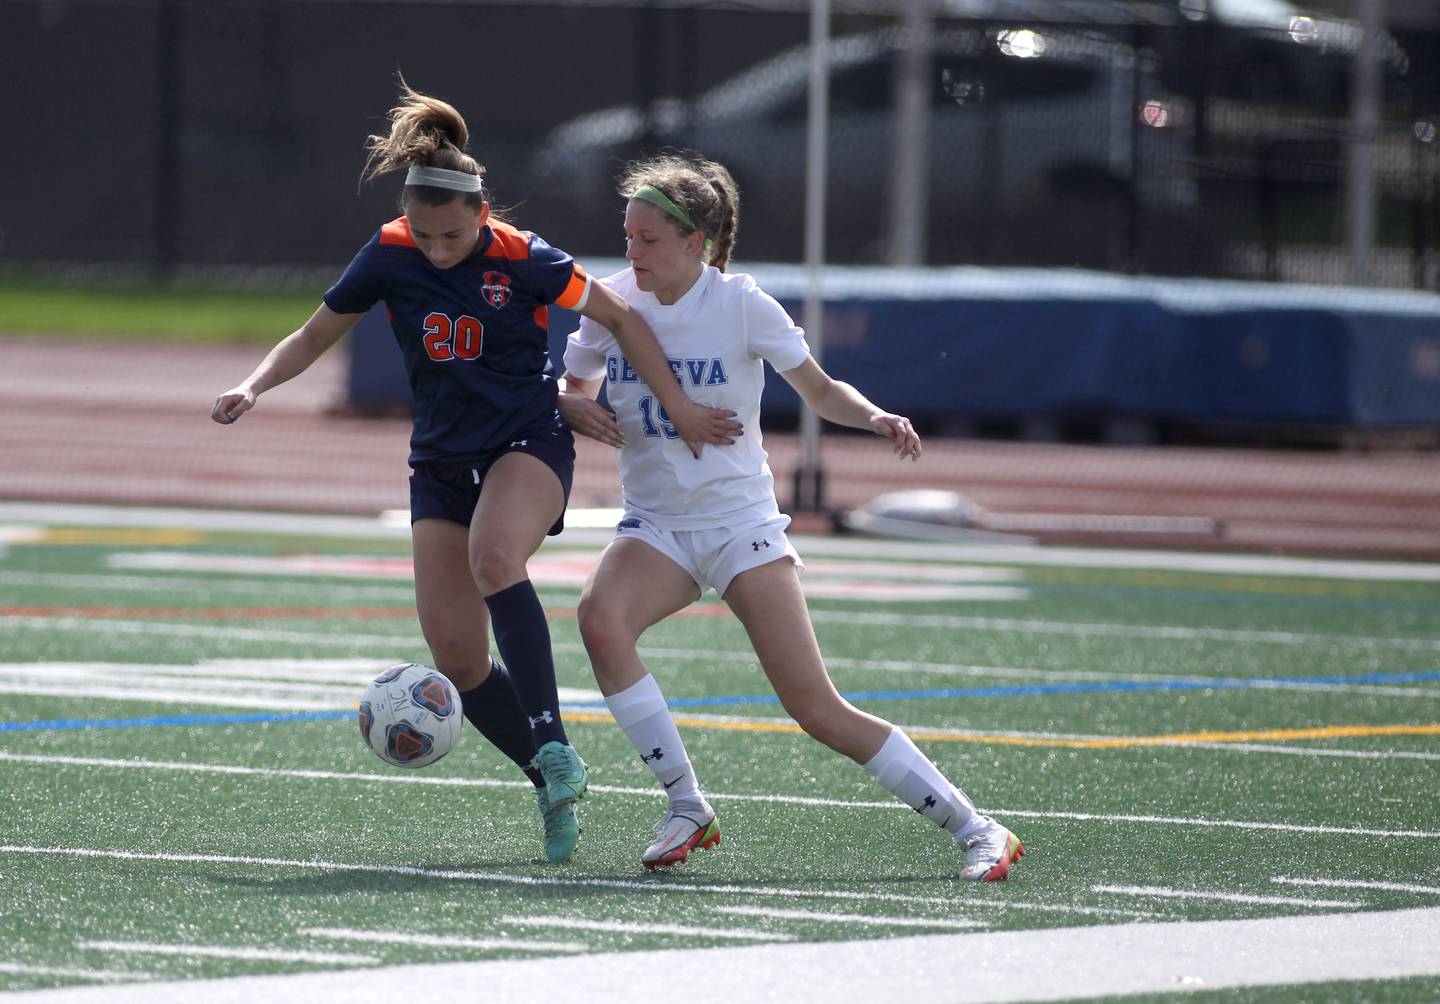 Oswego’s Anna Johnson (20) and Geneva’s Isabella Walls (15) go after the ball during a Naperville Invitational game at Naperville Central on Saturday, April 23, 2022.